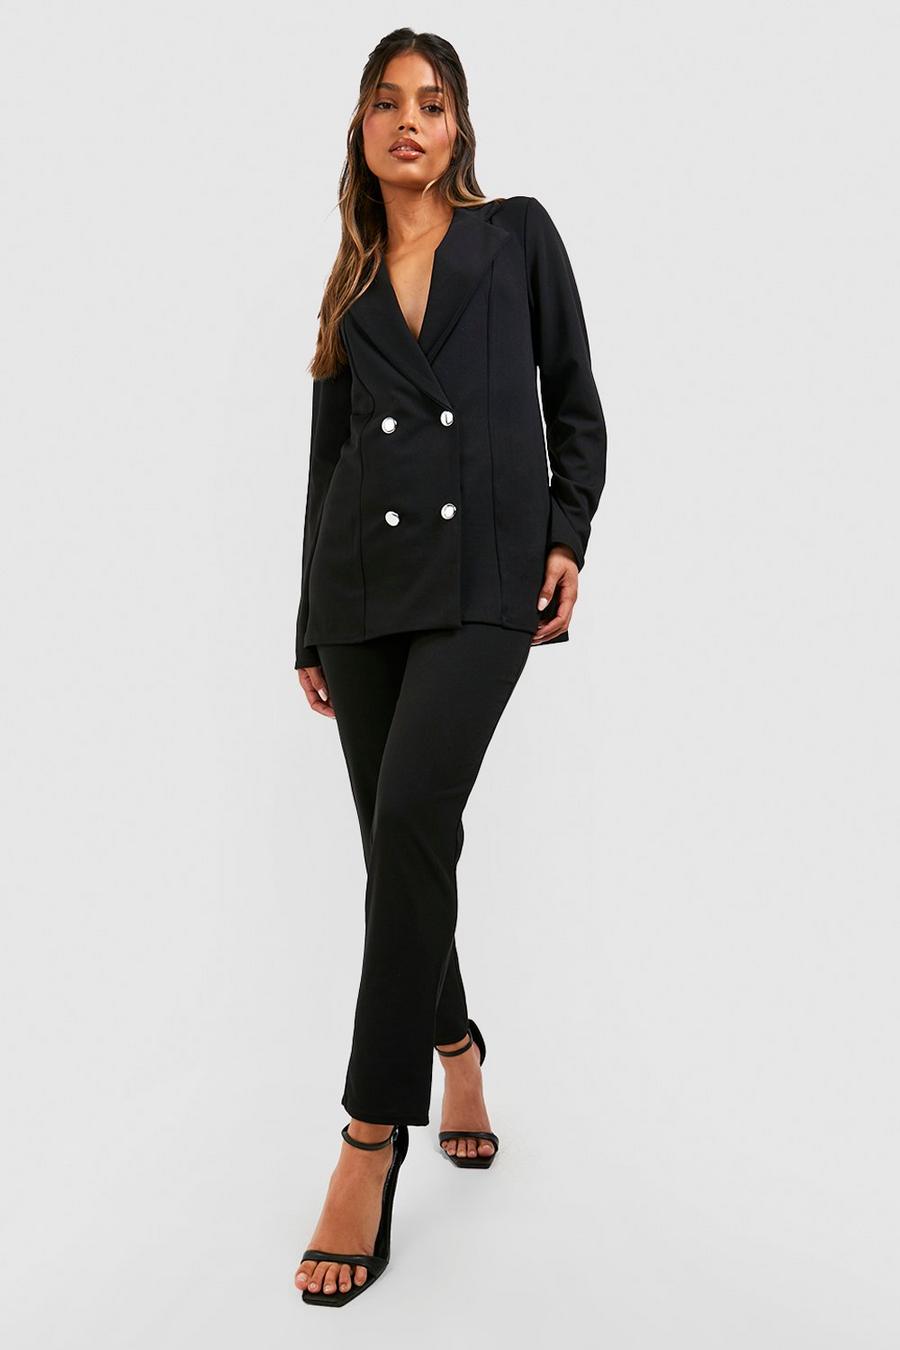 Black Jersey Knit Double Breasted Blazer And Pants Suit Set